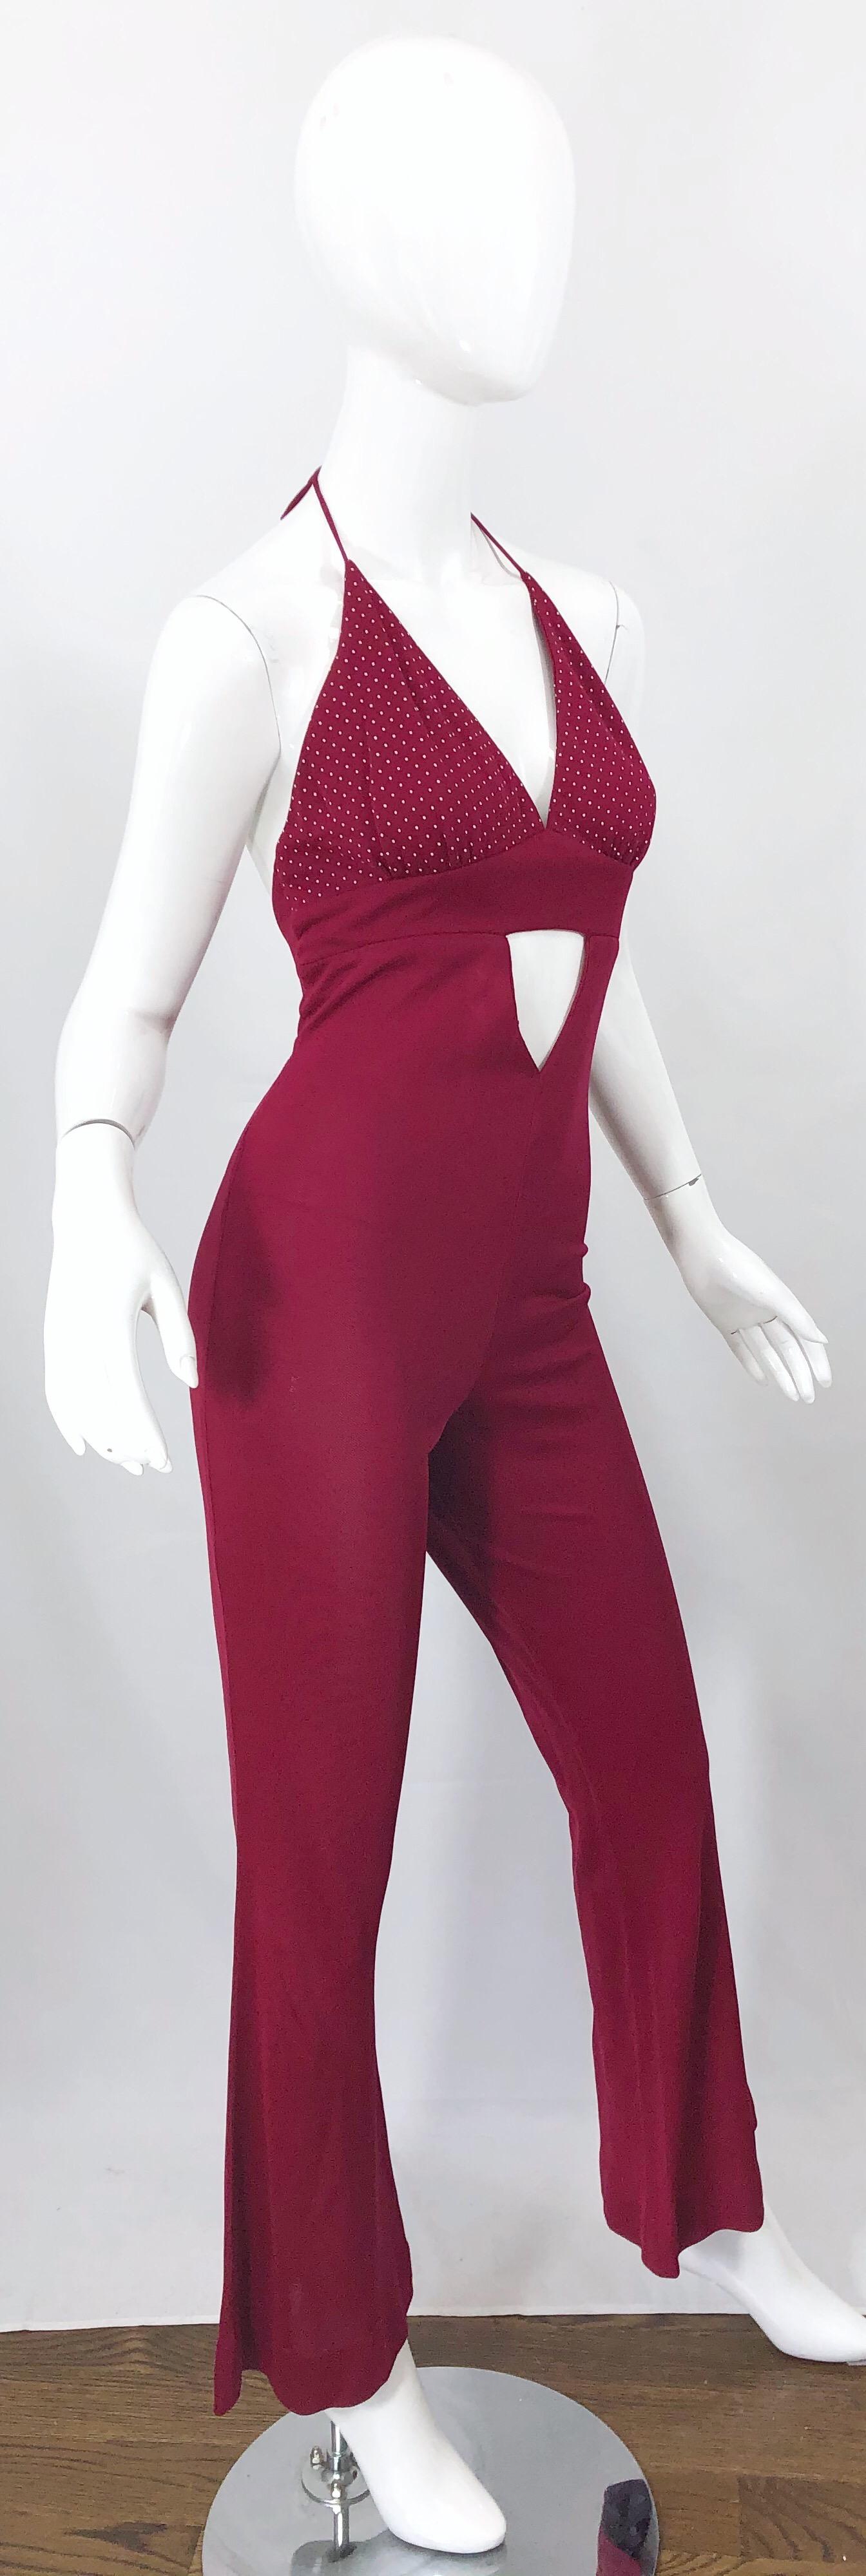 1970s Burgundy Polka Dot Cut-Out Flared Leg Vintage 70s Halter Jumpsuit In Good Condition For Sale In San Diego, CA